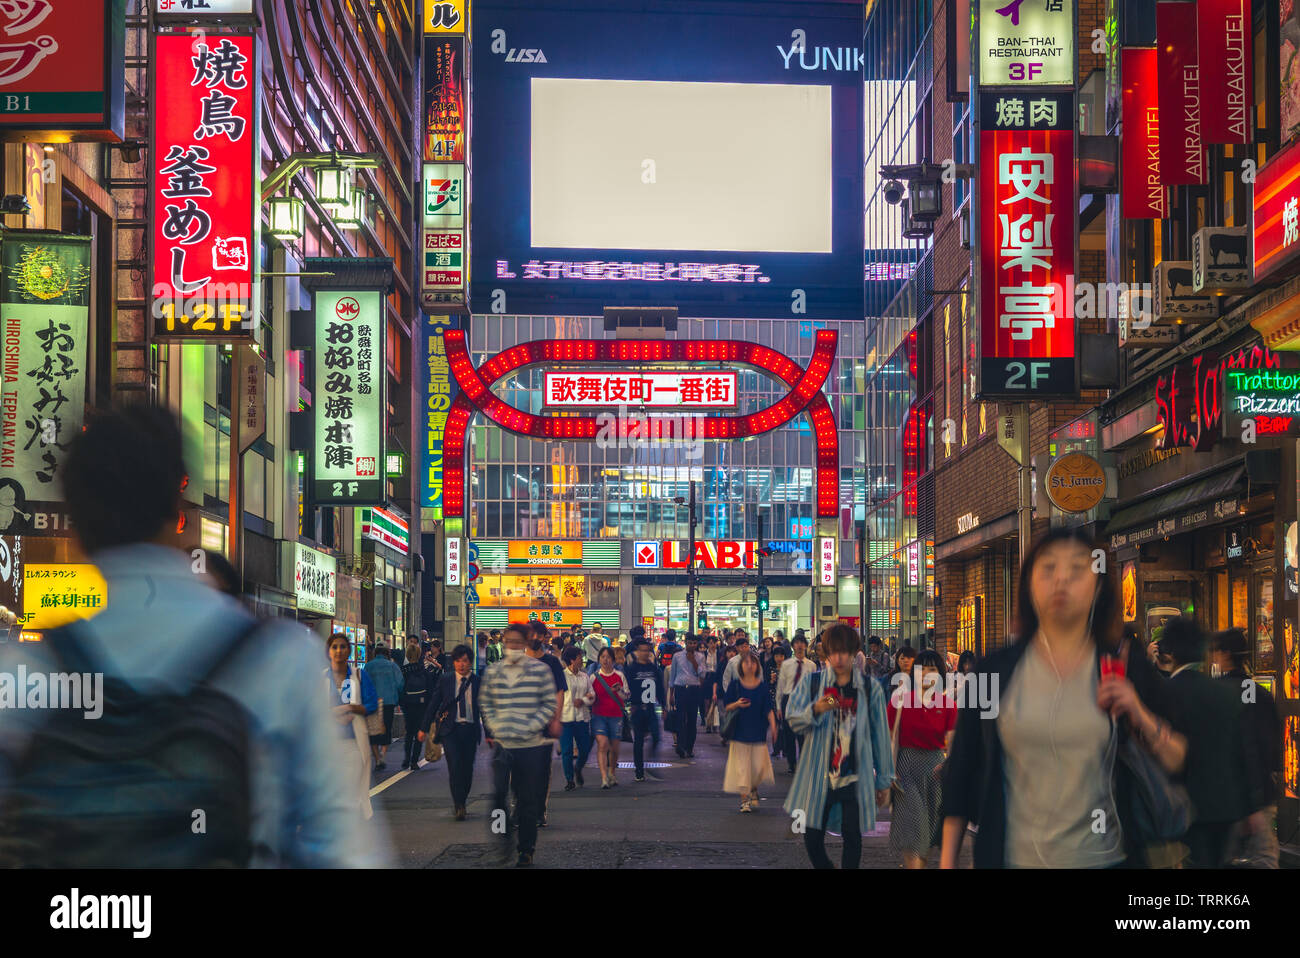 Tokyo, Japan - June 11, 2019: Kabukicho, sleepless town, red light district in Tokyo. The name comes from late-1940s plans to build a kabuki theater. Stock Photo